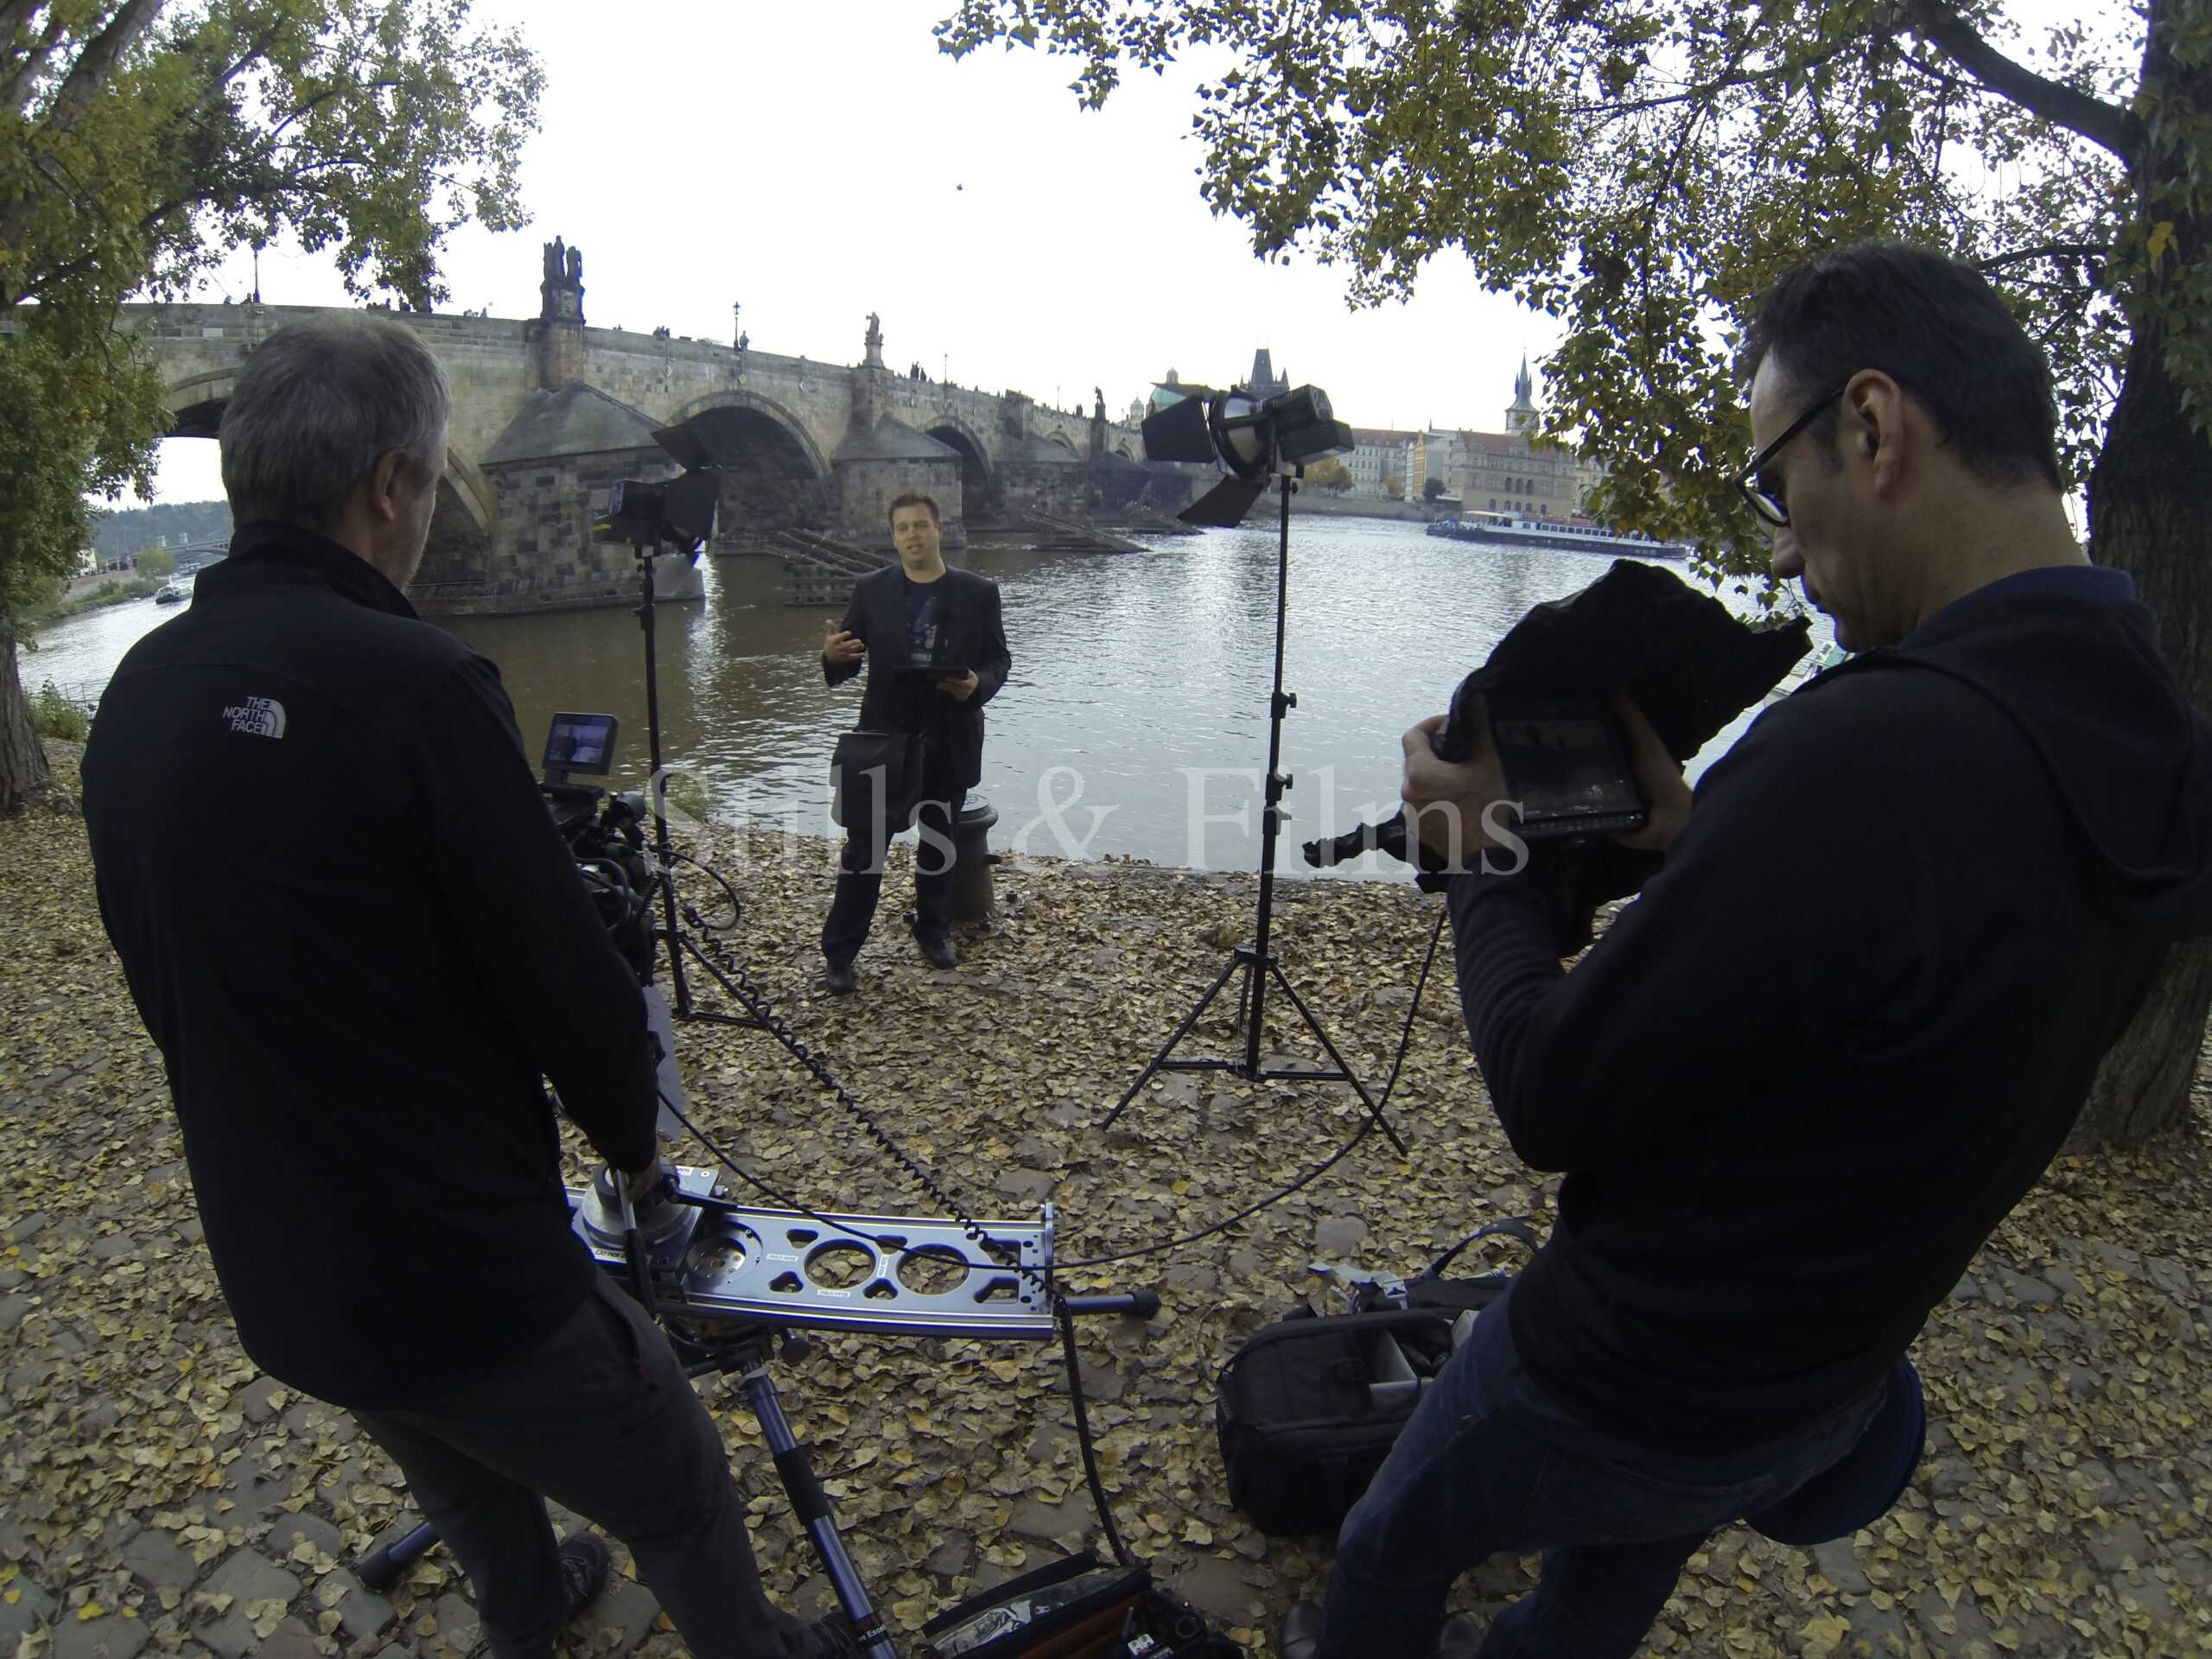 Production in Prague for Microsoft "Garage" series